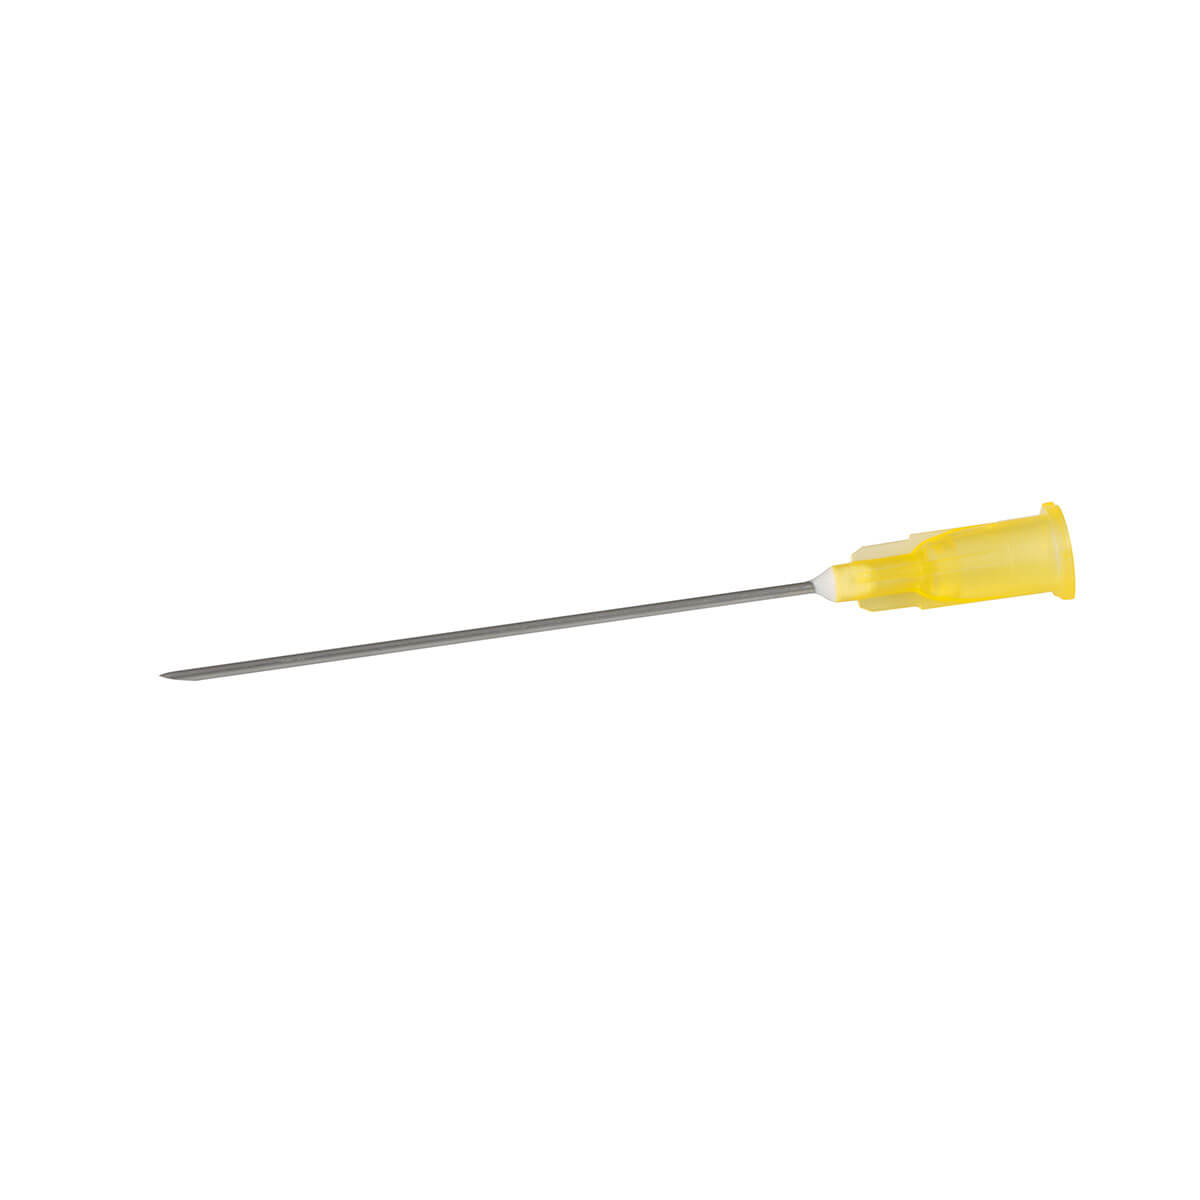 Neopoint Needle Yellow 20G 50MM